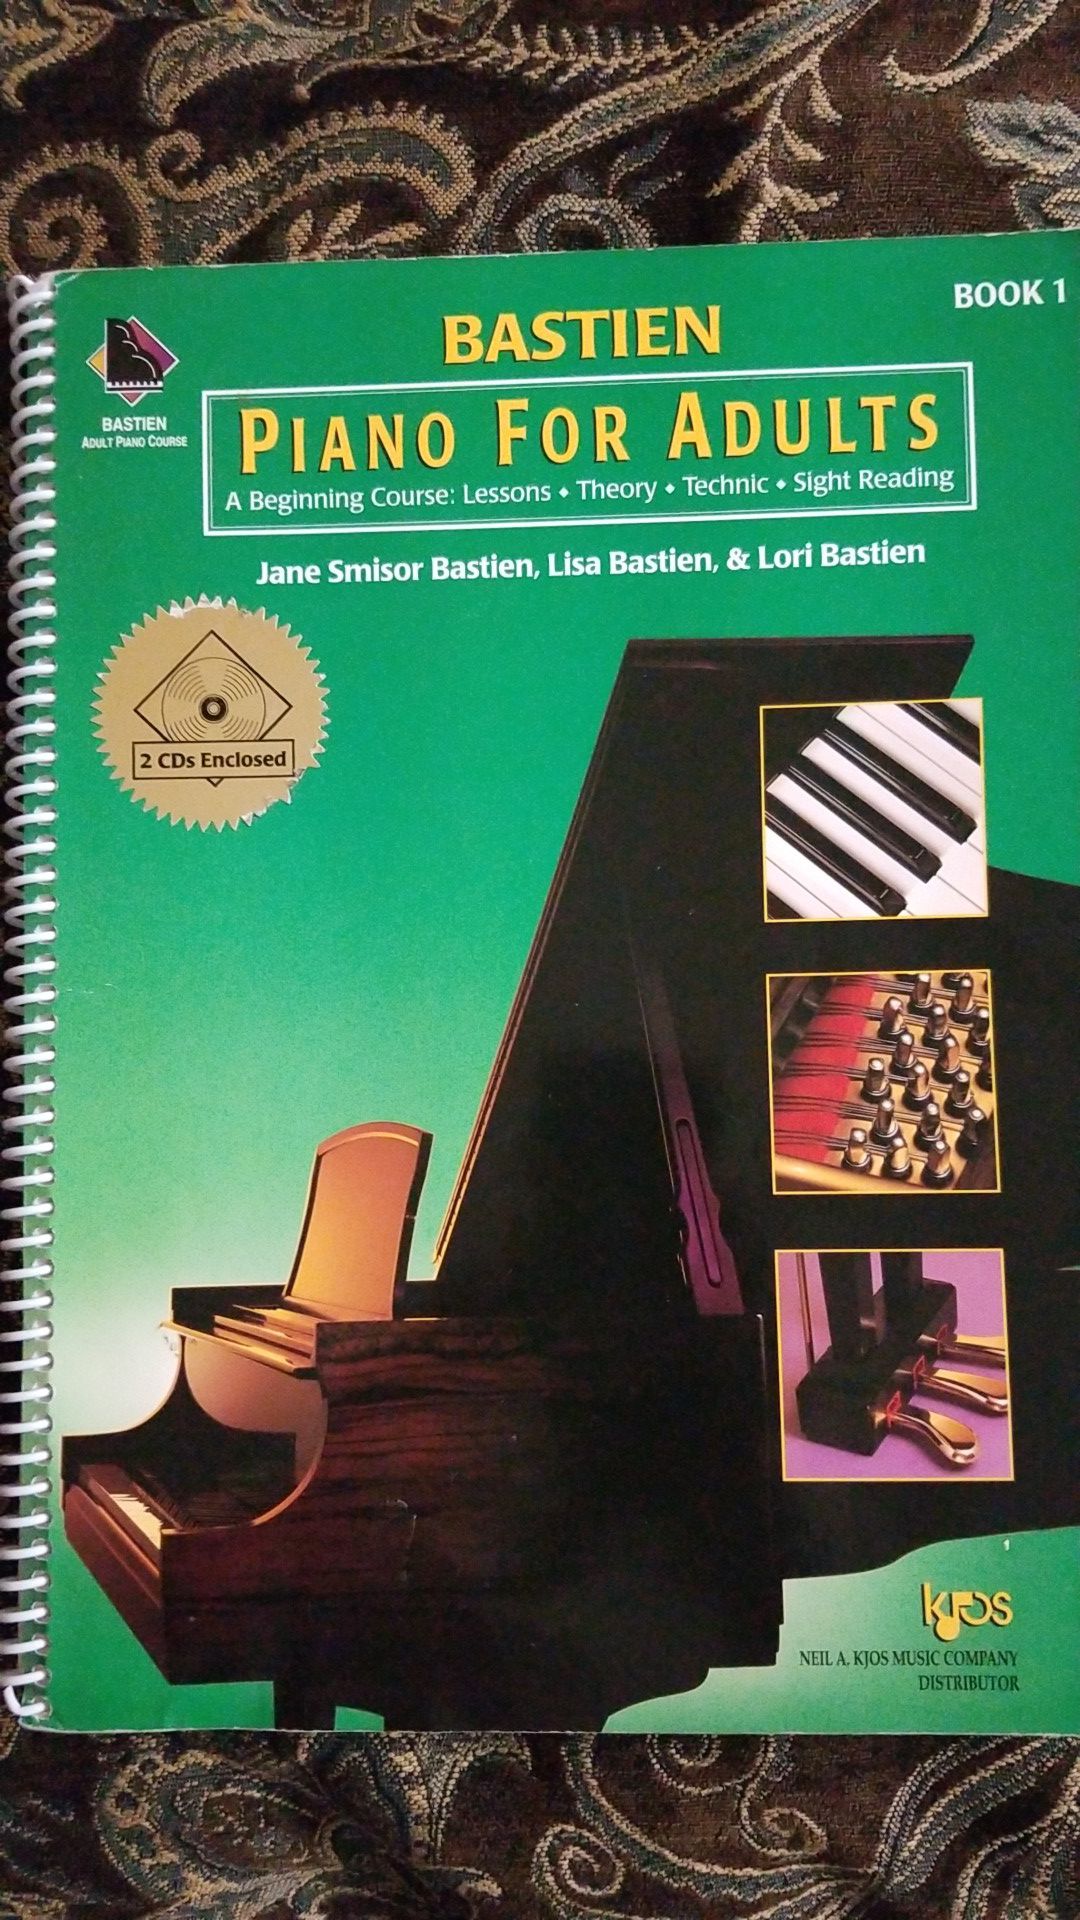 Piano for Adults book 1